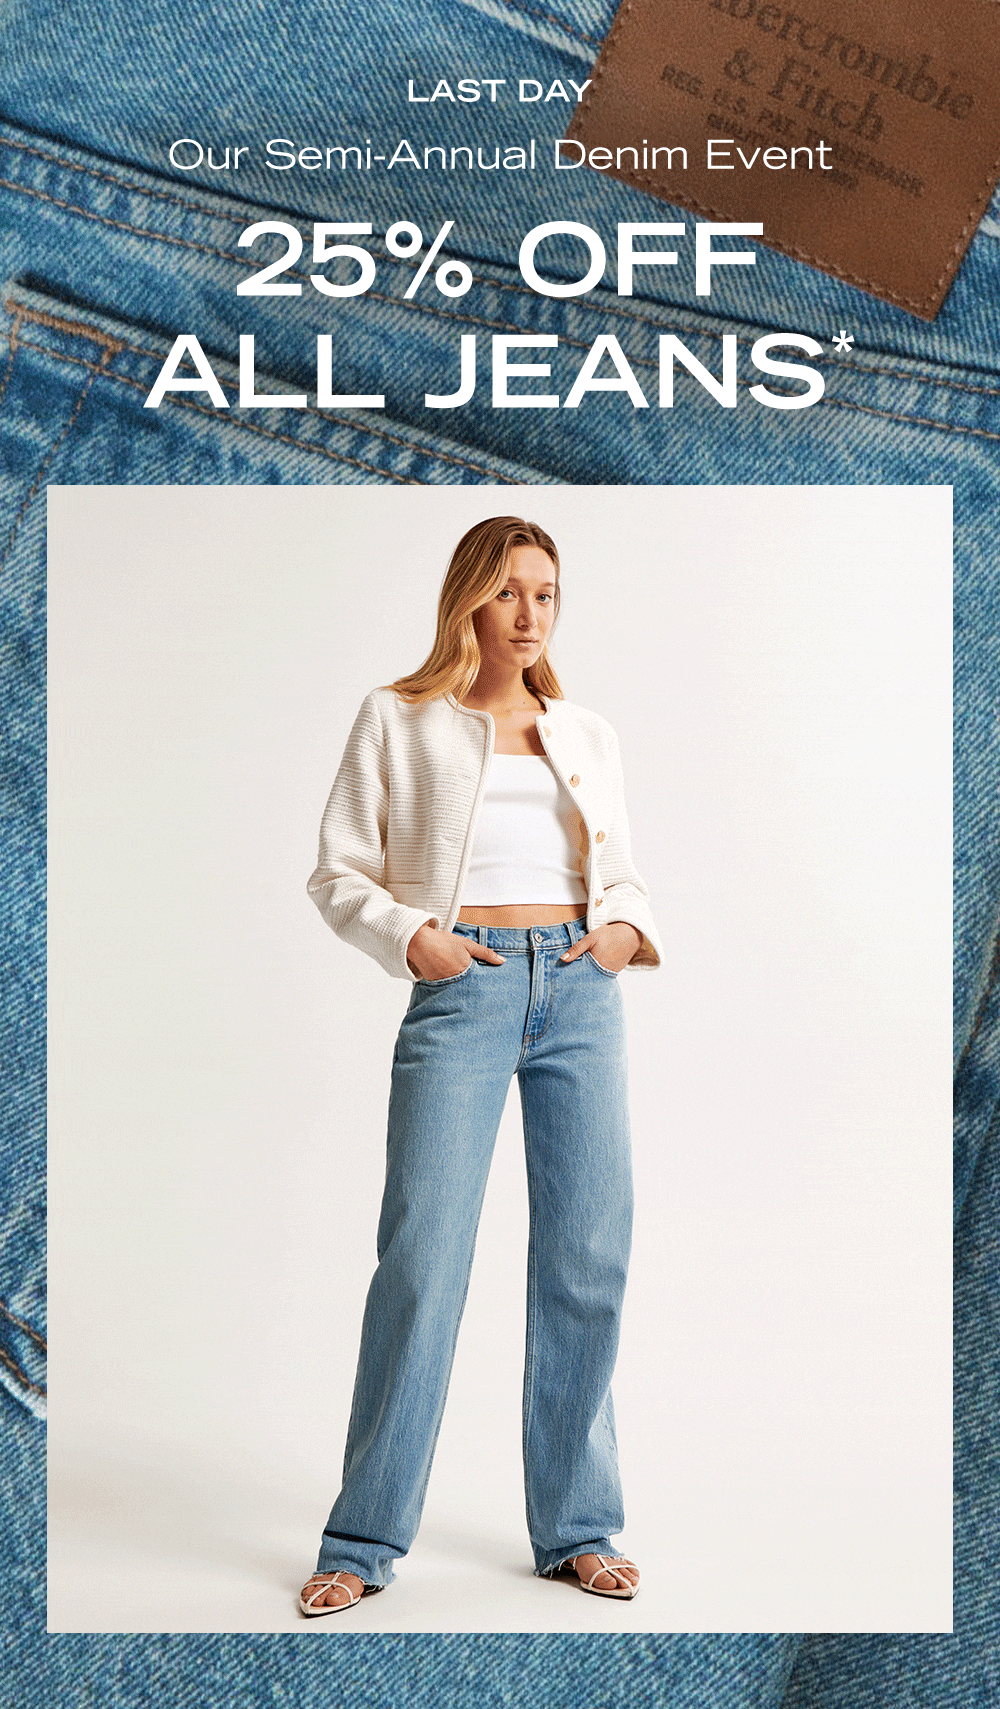 LAST DAY

Our Semi-Annual Denim Event
25% OFF ALL JEANS*